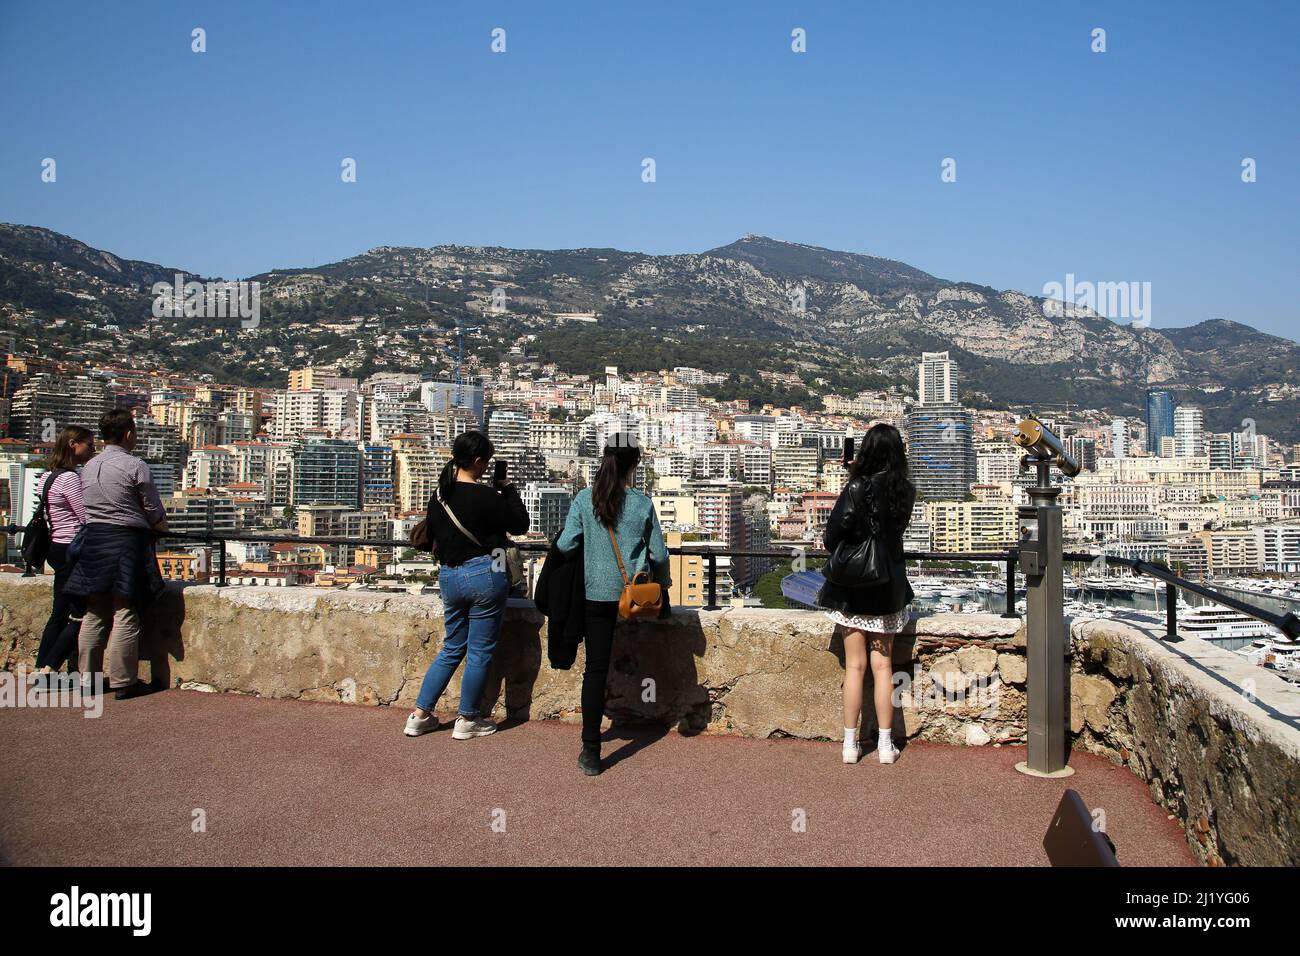 Monte-Carlo, Monaco. 28 Mar 2022 - Tourist view the Marina and buildings in Monte-Carlo on a sunny and warm day. Credit Dinendra Haria /Alamy Live News Stock Photo